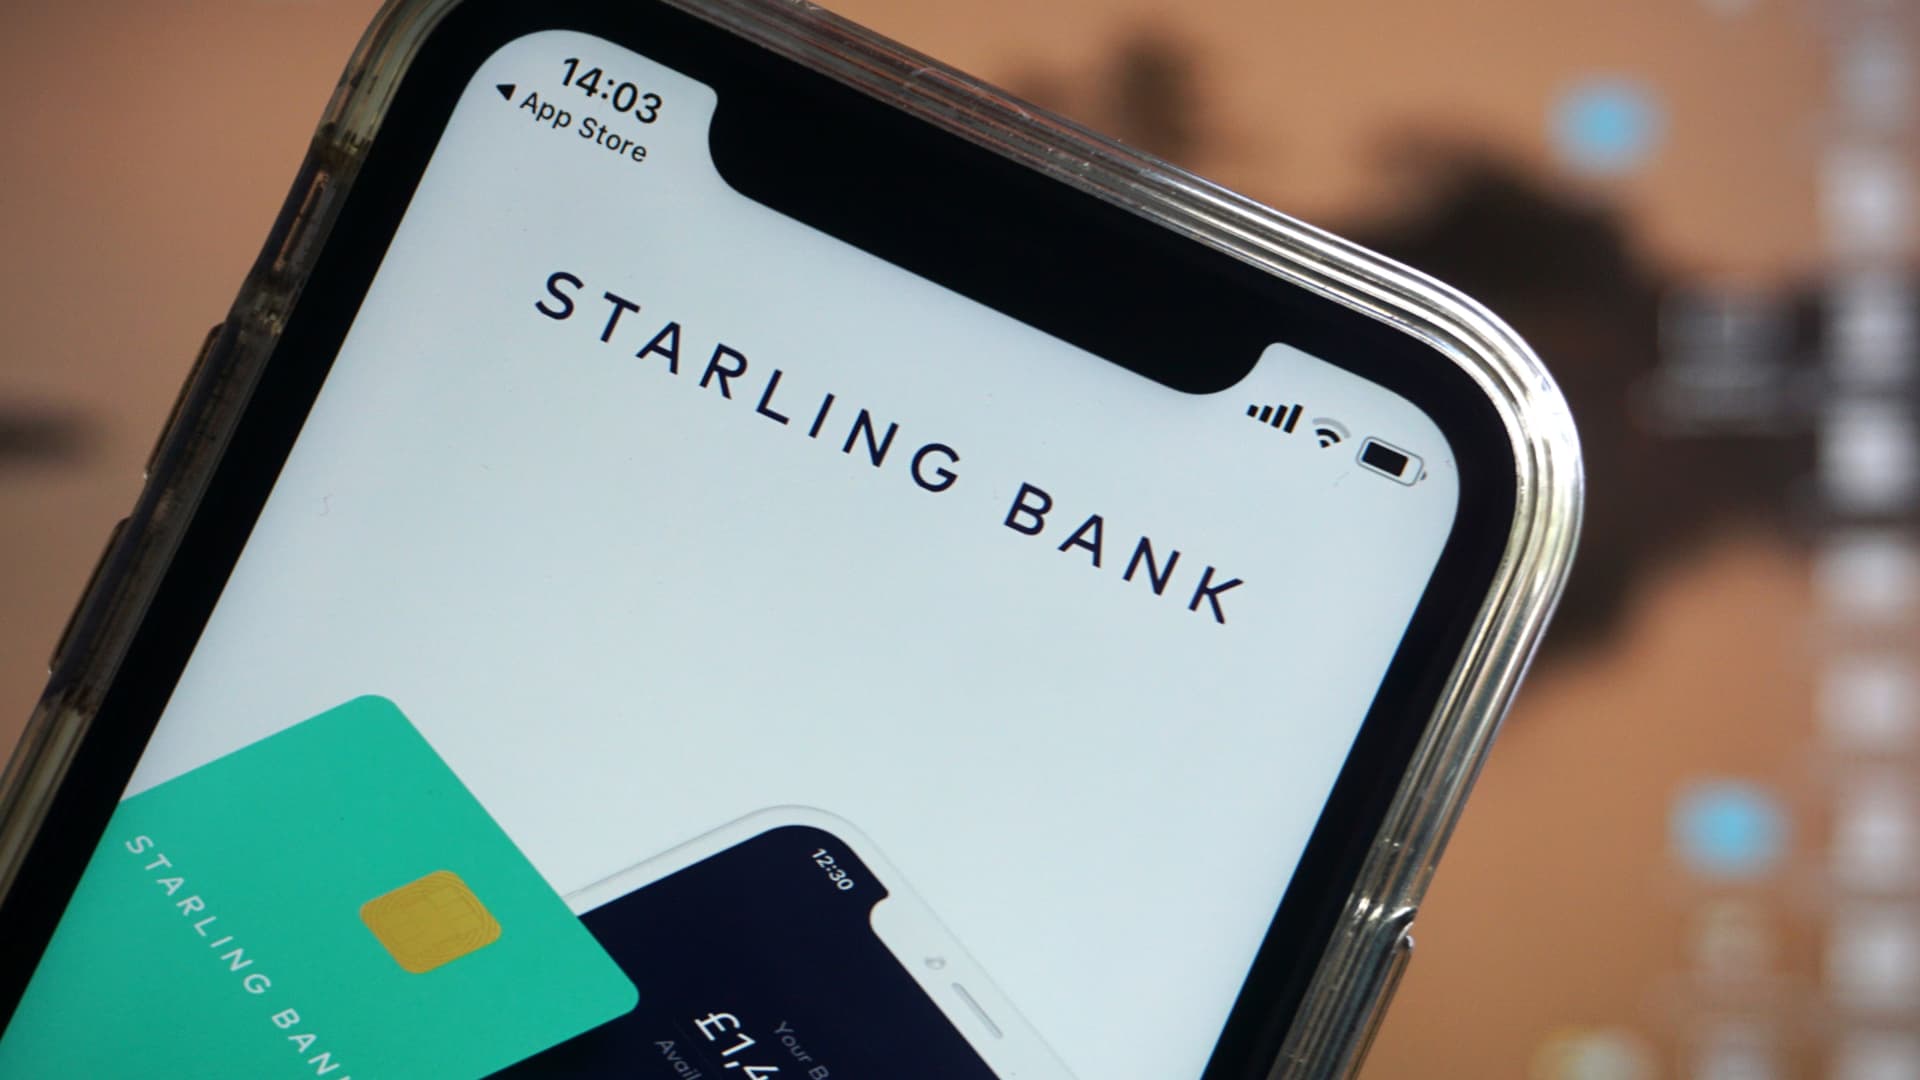 Goldman-backed digital bank Starling reports first annual profit